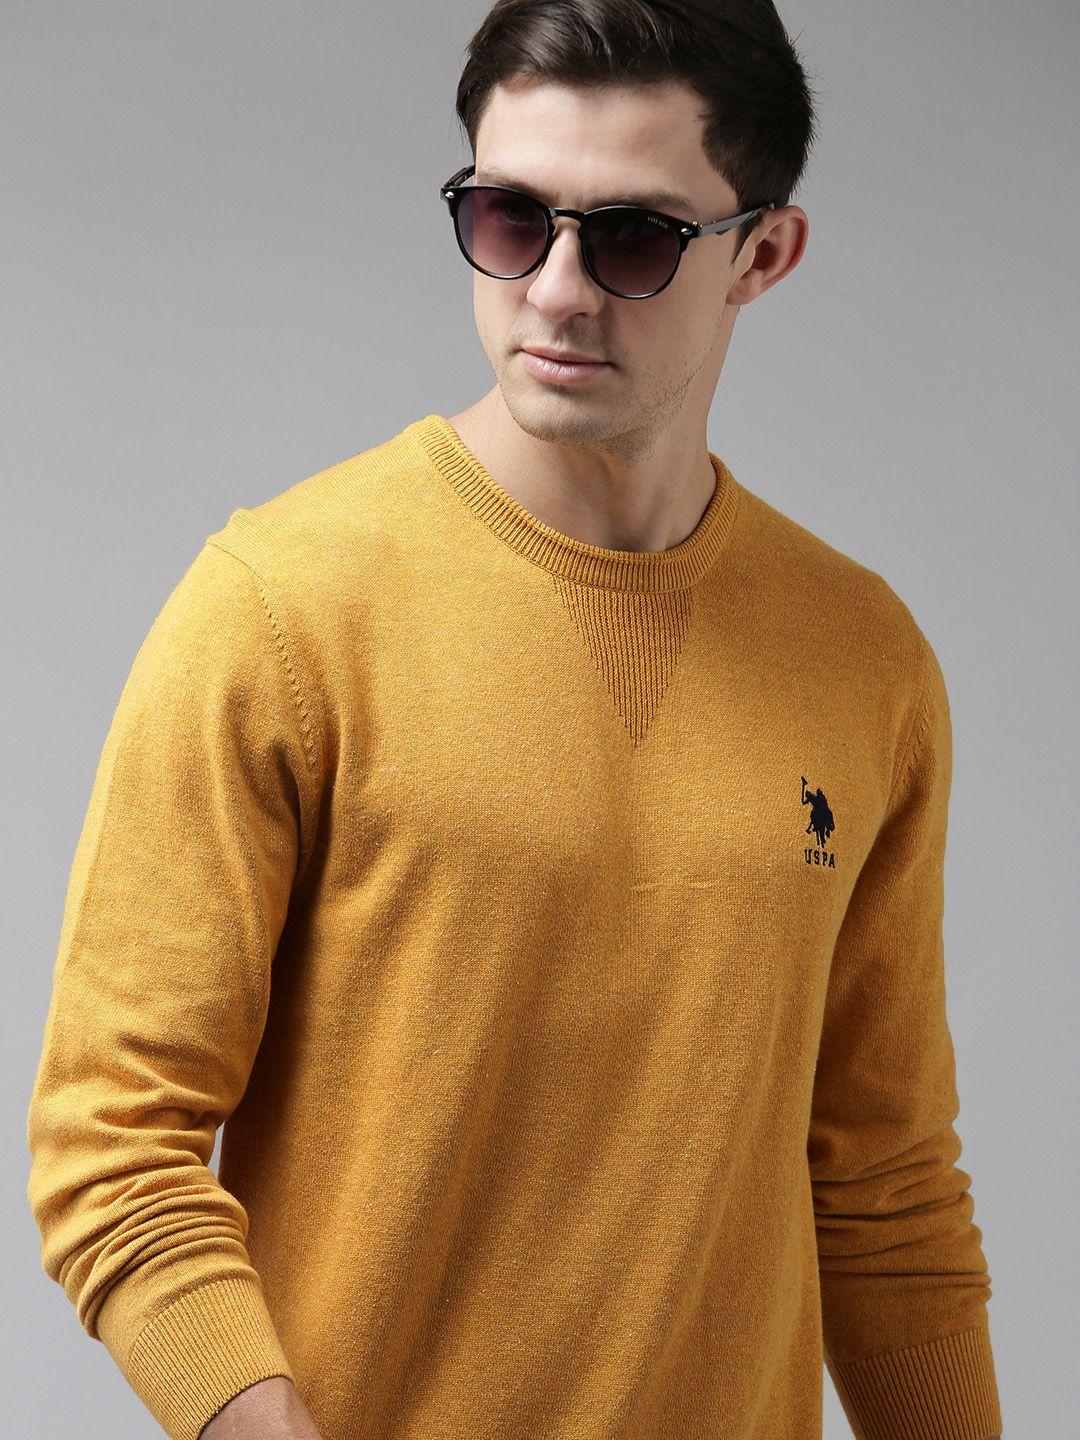 u s polo assn men mustard ribbed yellow round neck pure cotton pullover sweater